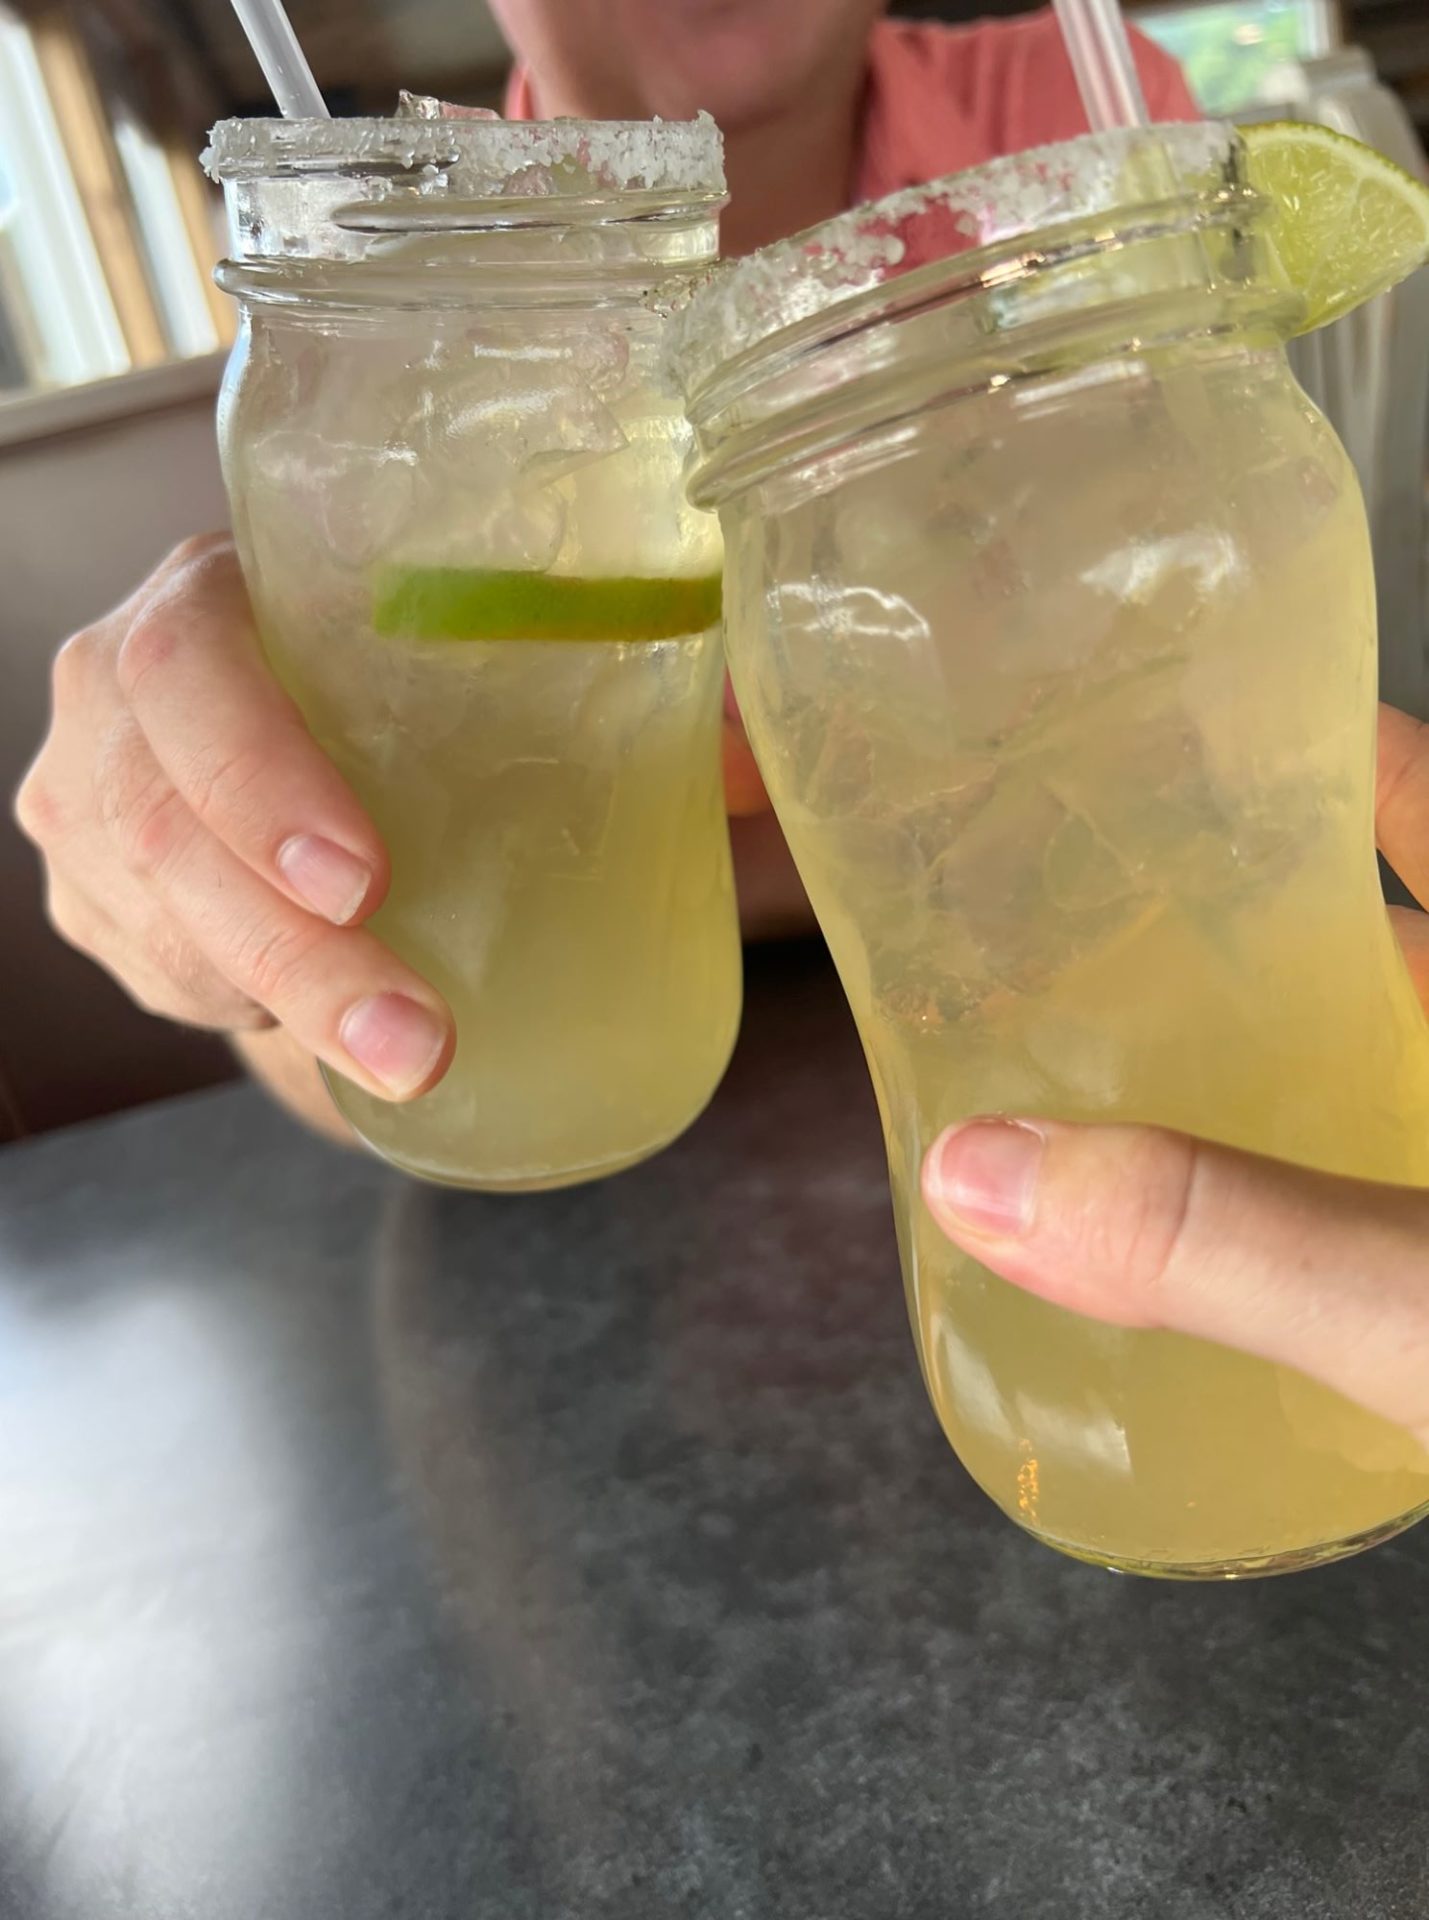 A close up of hands, each holding a glass with a yellowish liquid. The glass rims are lined with salt, and have a lime on the edge.